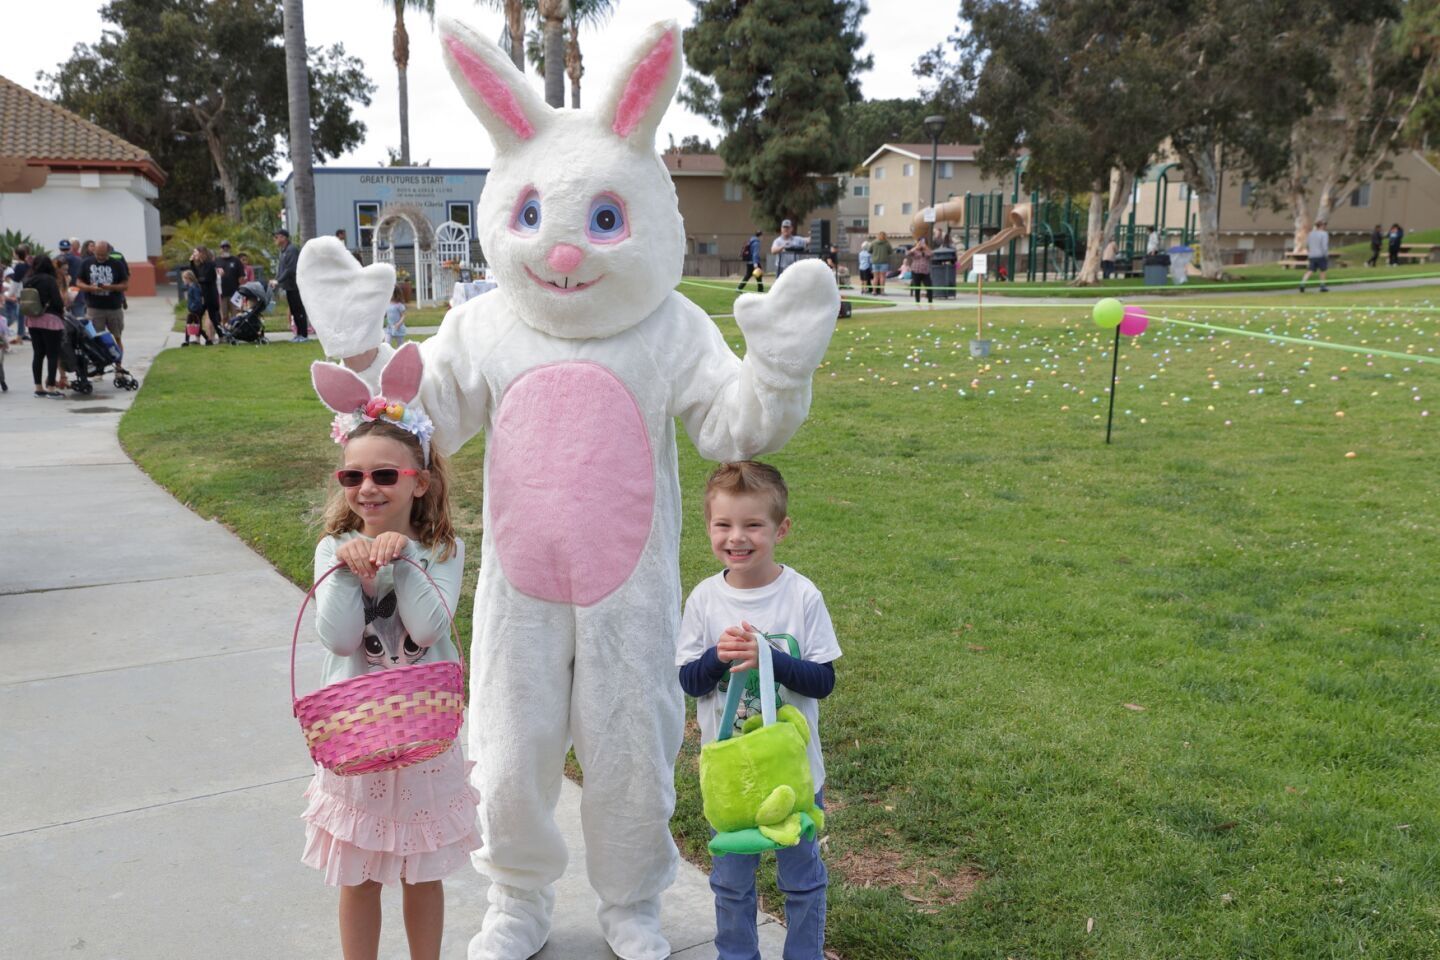 Local egg hunt action for kids and families - Del Mar Times